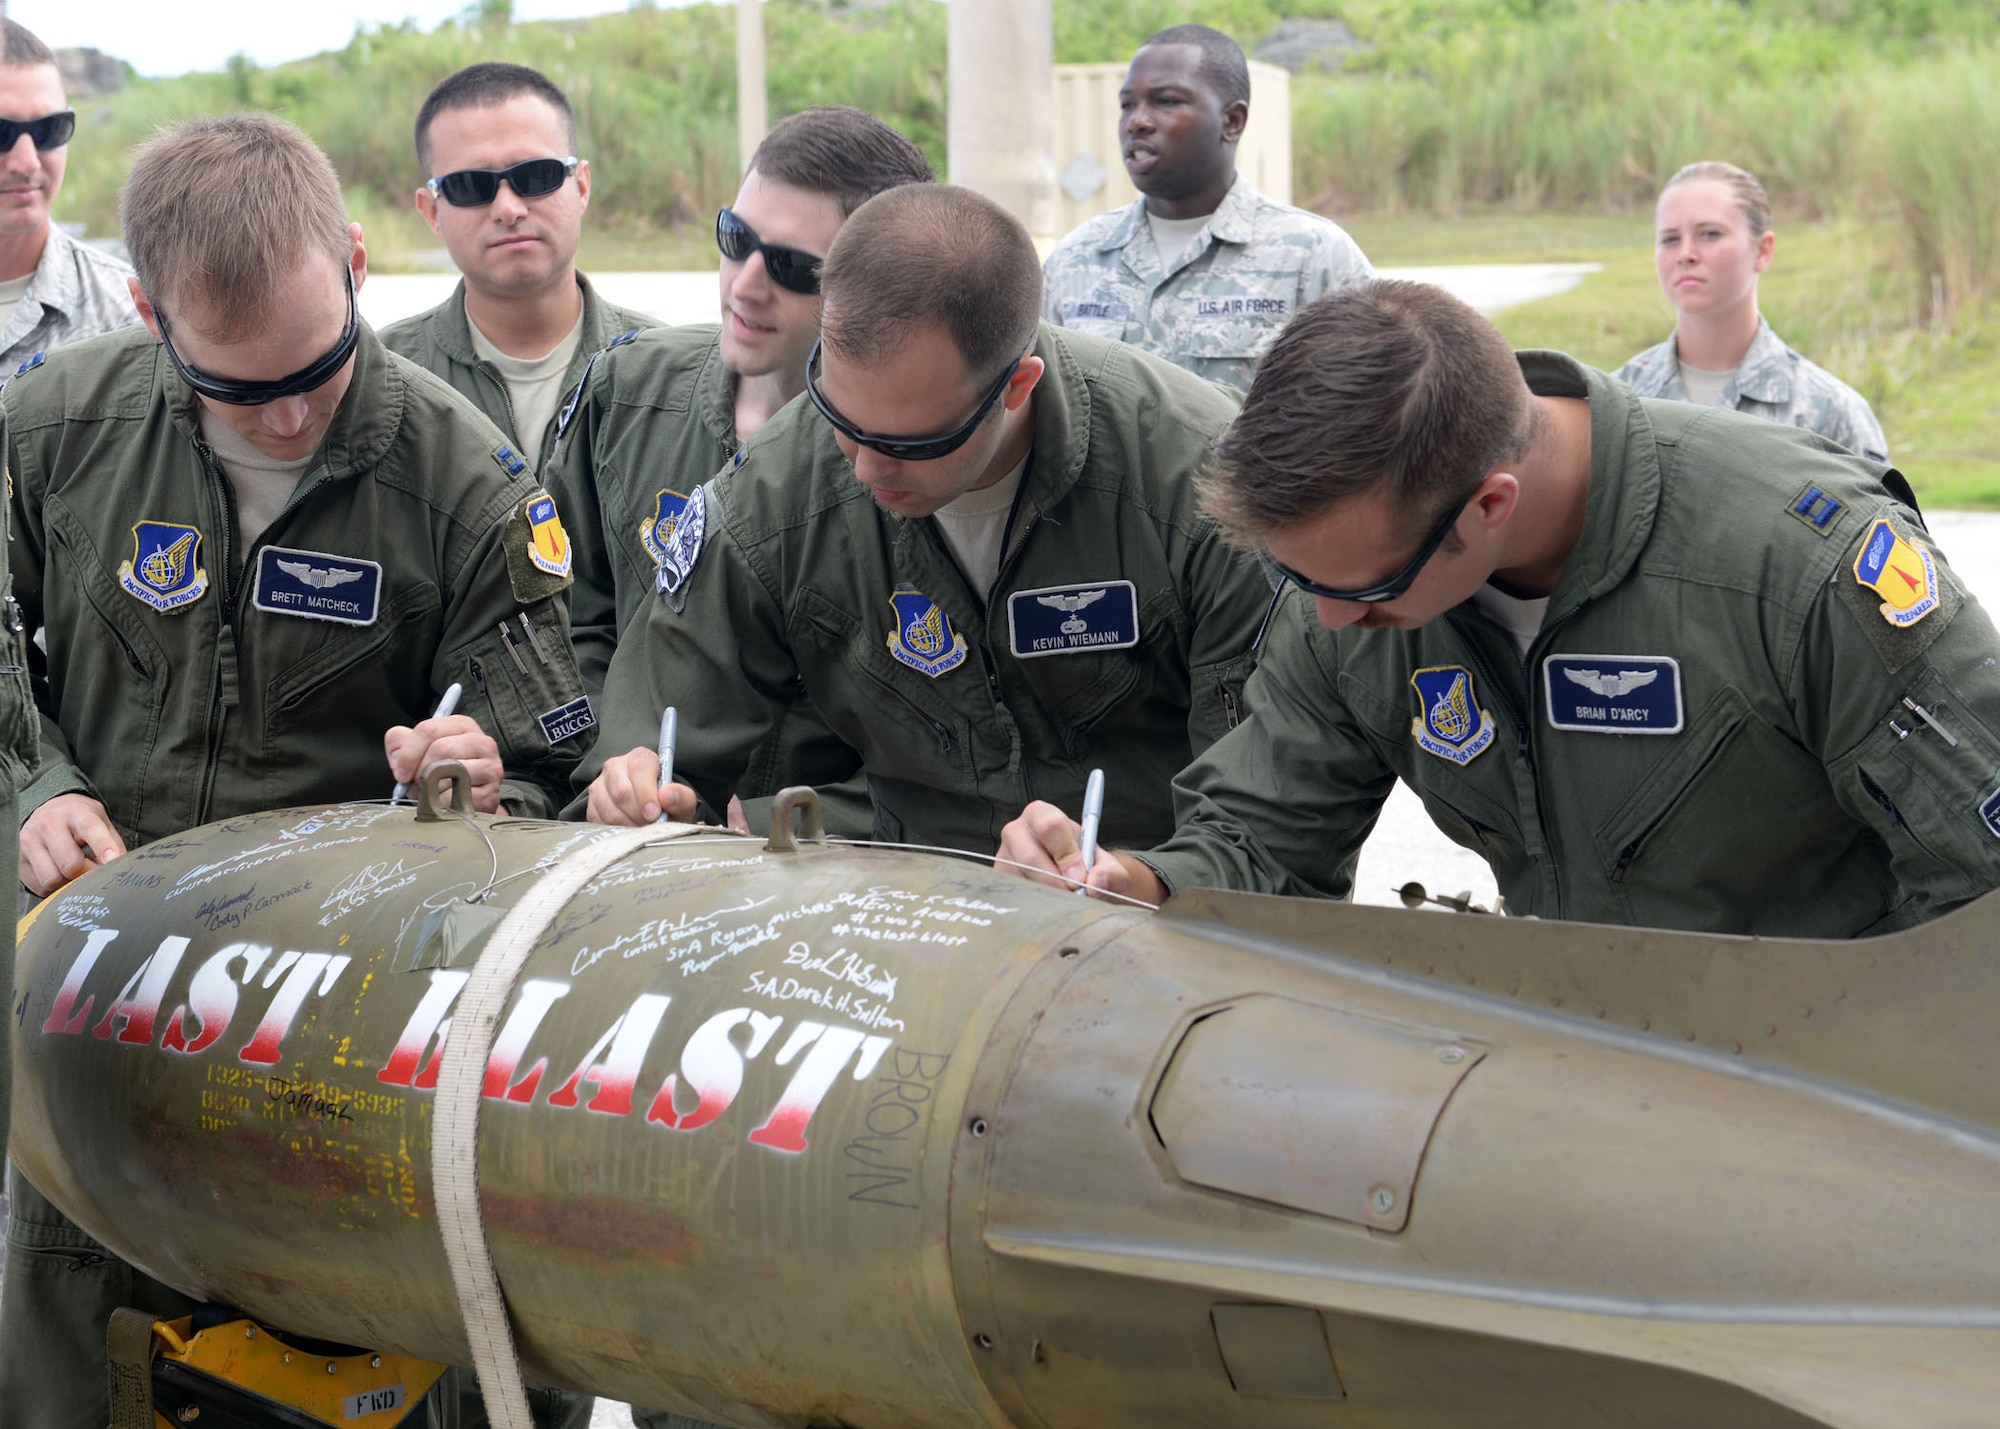 U.S. Air Force Airmen from the 20th Expeditionary Bomb Squadron sign the ‘Last Blast’ June 24, 2015, at Andersen Air Force Base, Guam. With the help of 36th Munitions Squadron Airmen, 20th EBS aircrew dropped the final M117 bomb in the Pacific Air Force’s inventory June 26 on an uninhabited island off the coast of Guam. (U.S. Air Force photo by Airman 1st Class Joshua Smoot/Released)
